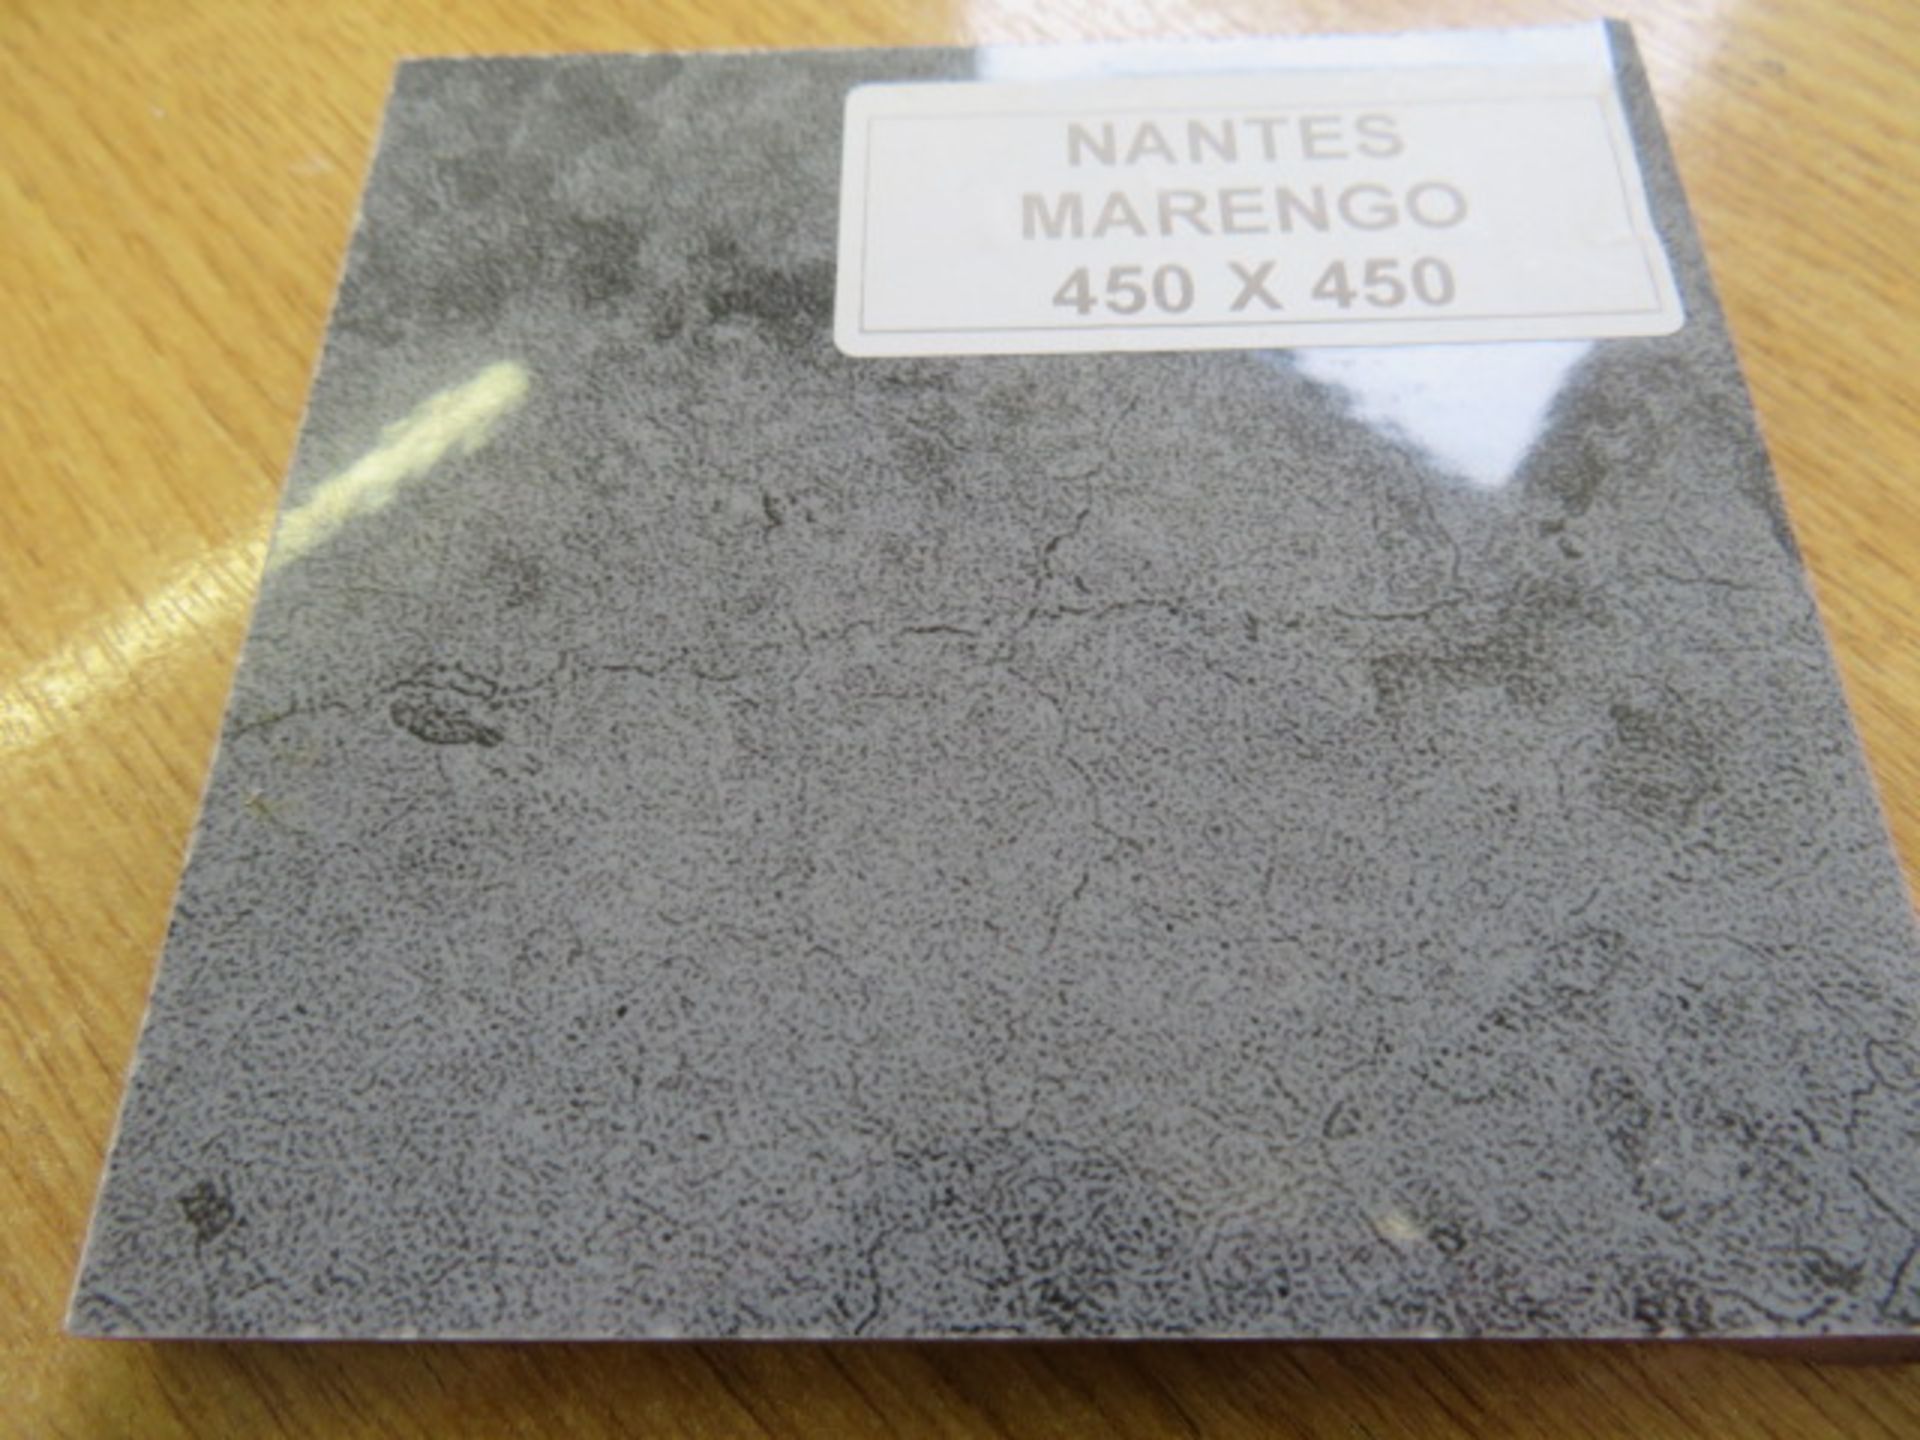 NEW 7.2 Square Meters of Nantes Marengo Wall and Floor Tiles. 450x450mm per tile, 8mm thi... - Image 3 of 3